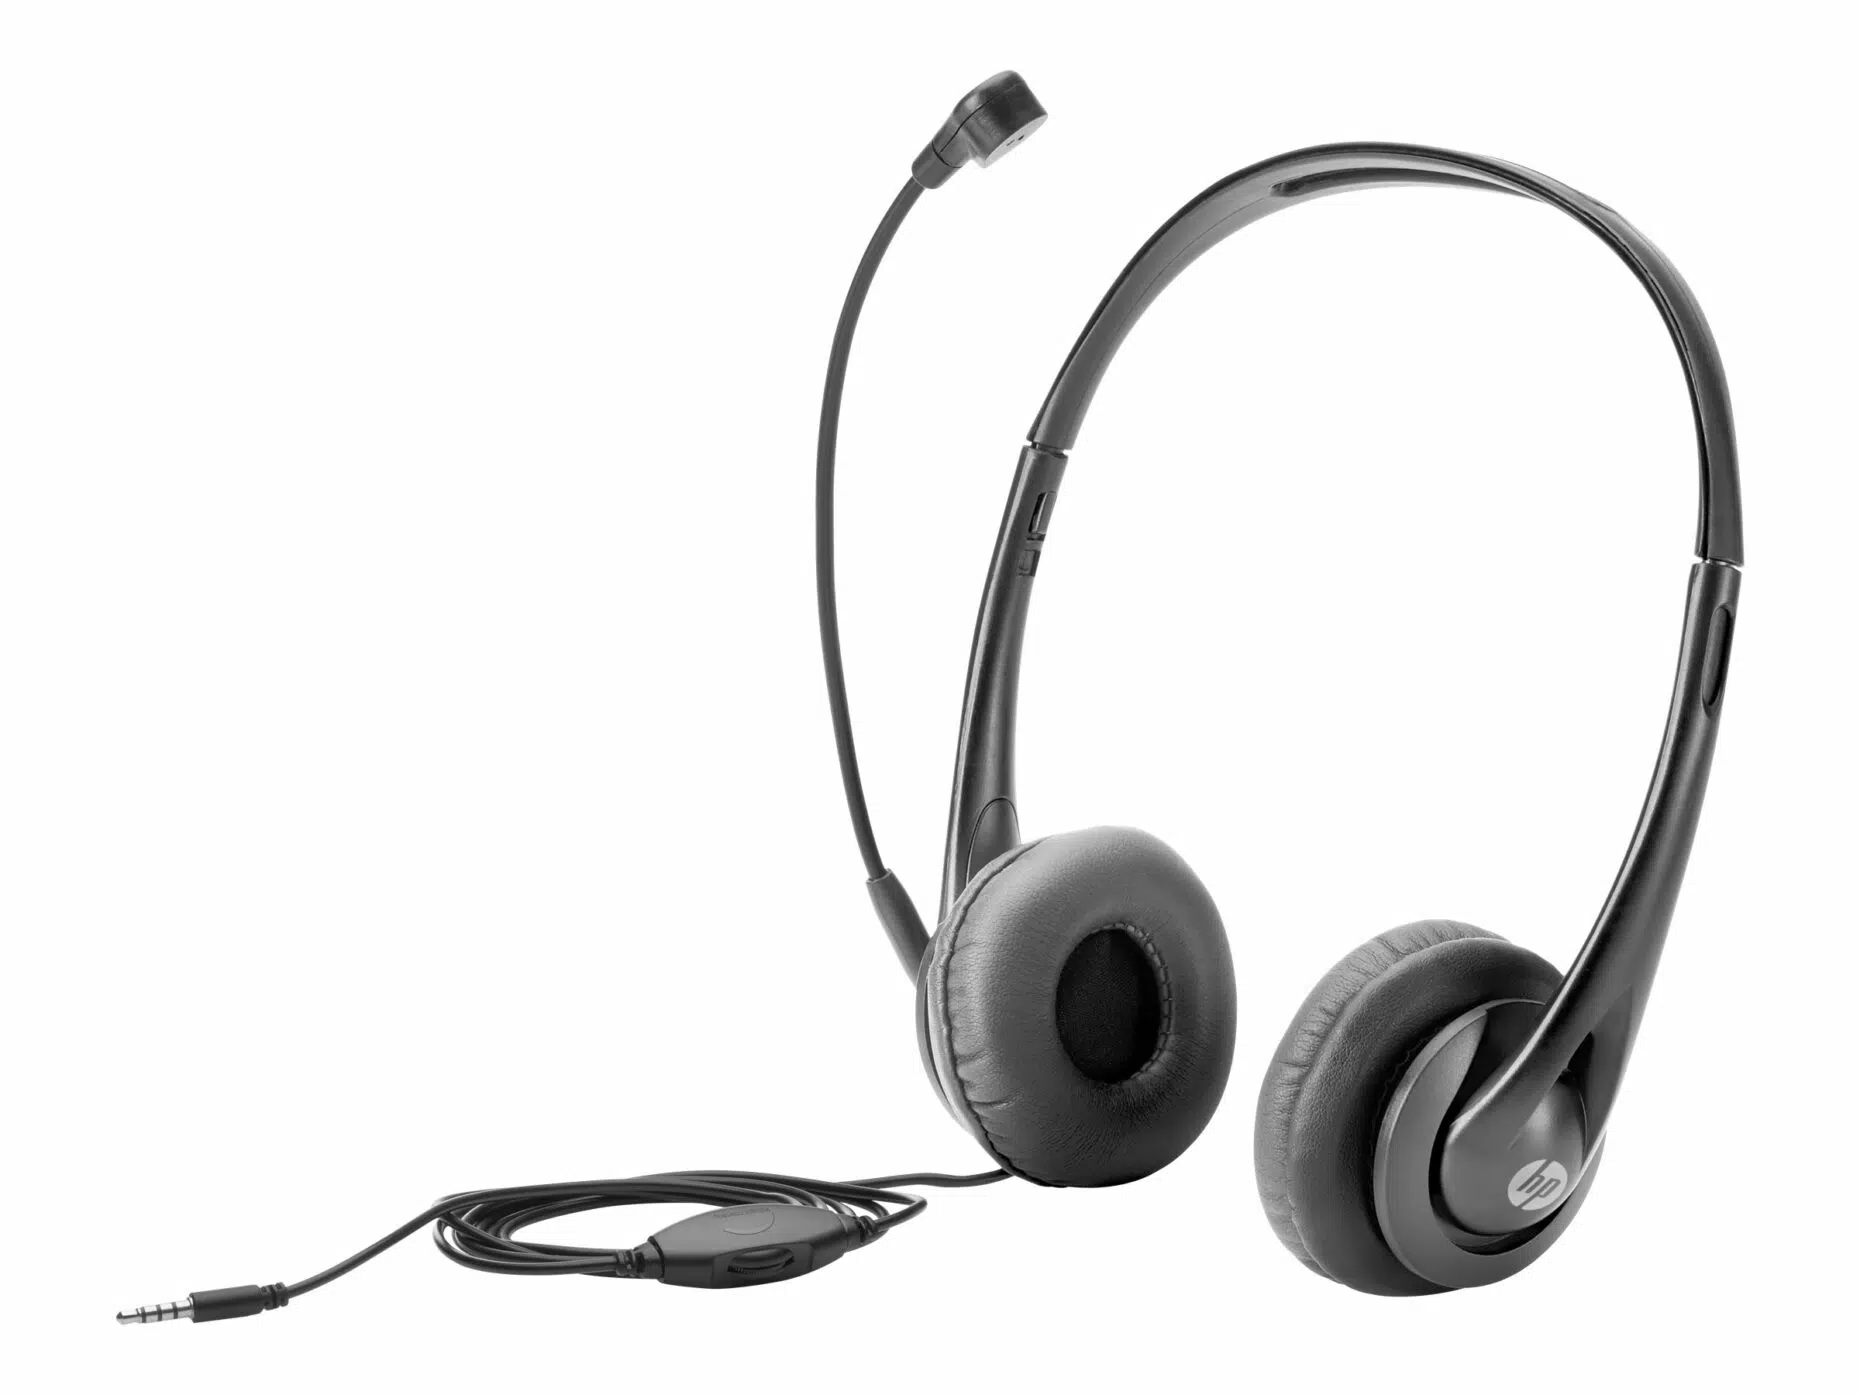 HP - on-ear - Wired - Headset